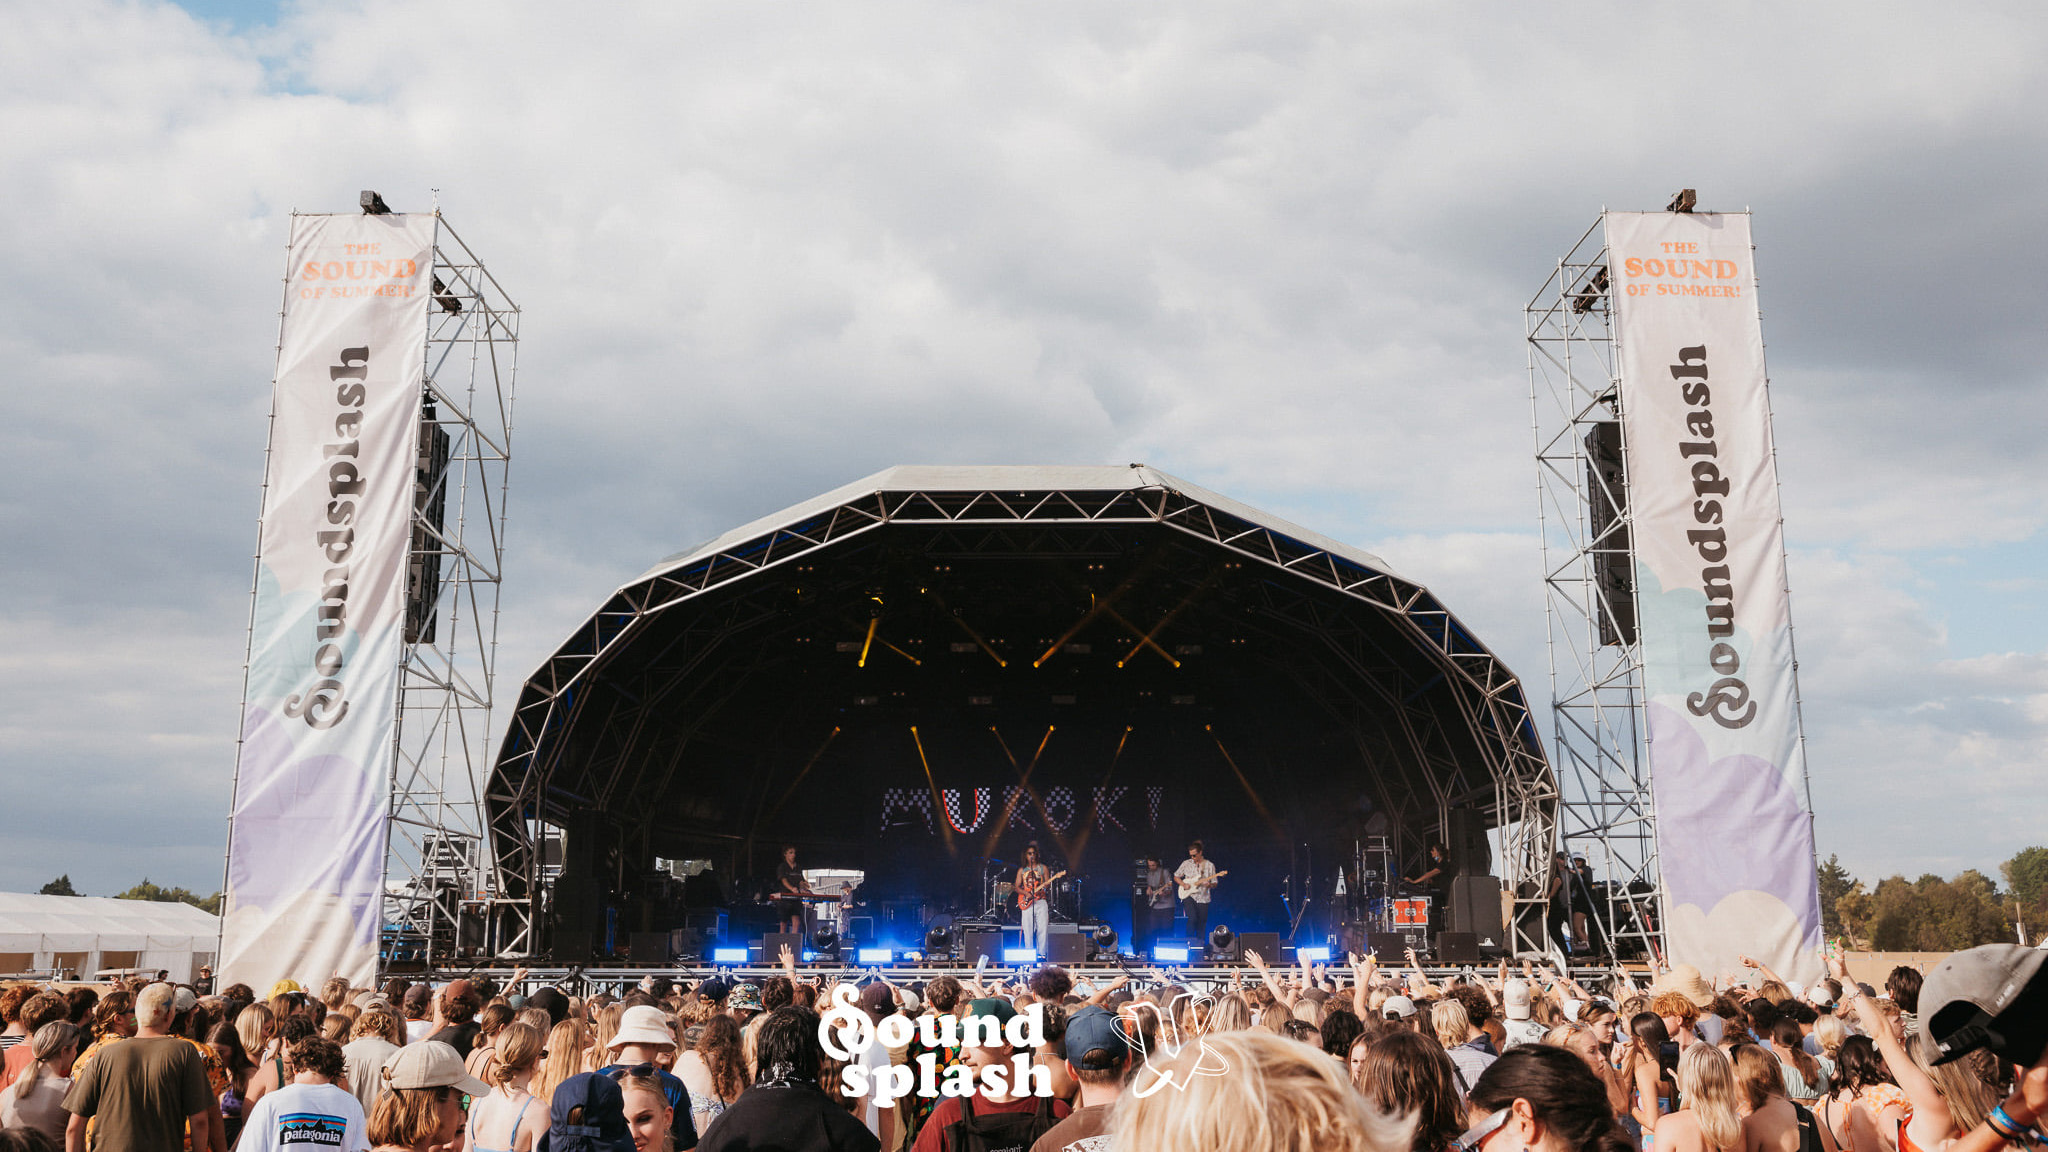 A number&#39; of Covid-19 cases attended Soundsplash festival